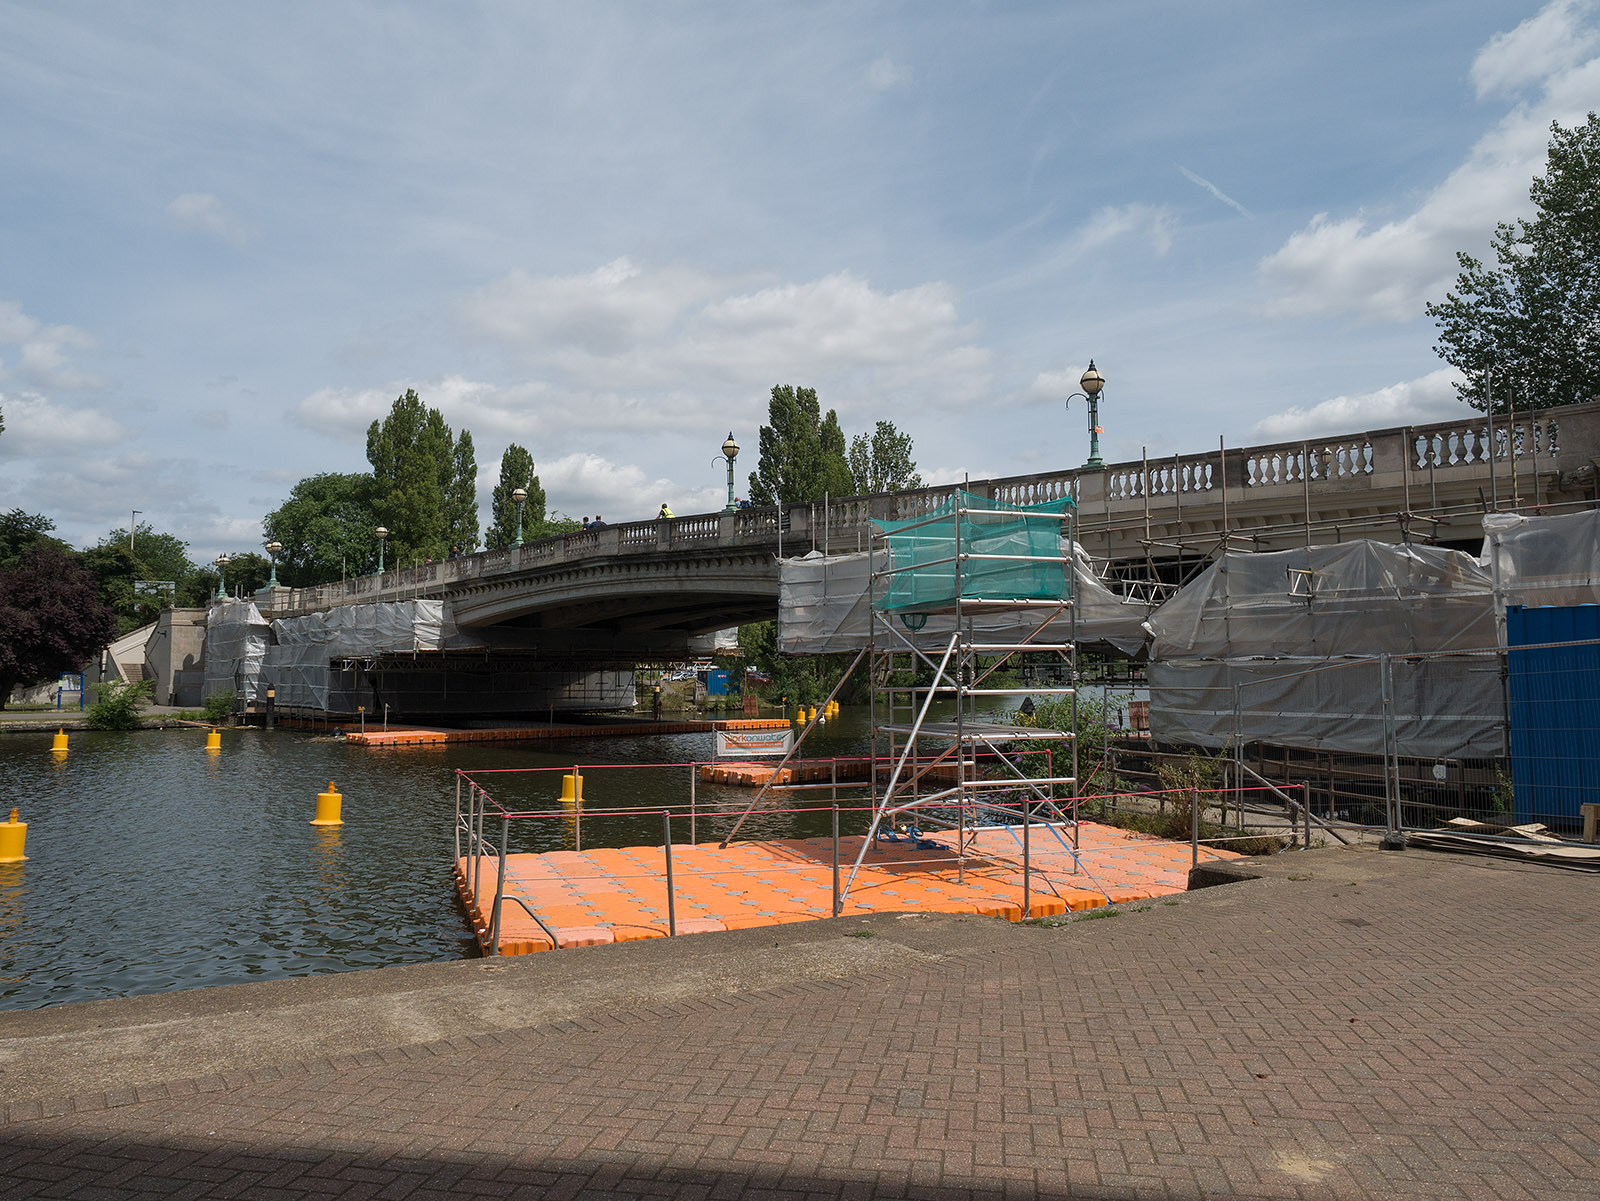 The start - the Bridge at Reading, still out of bounds during works